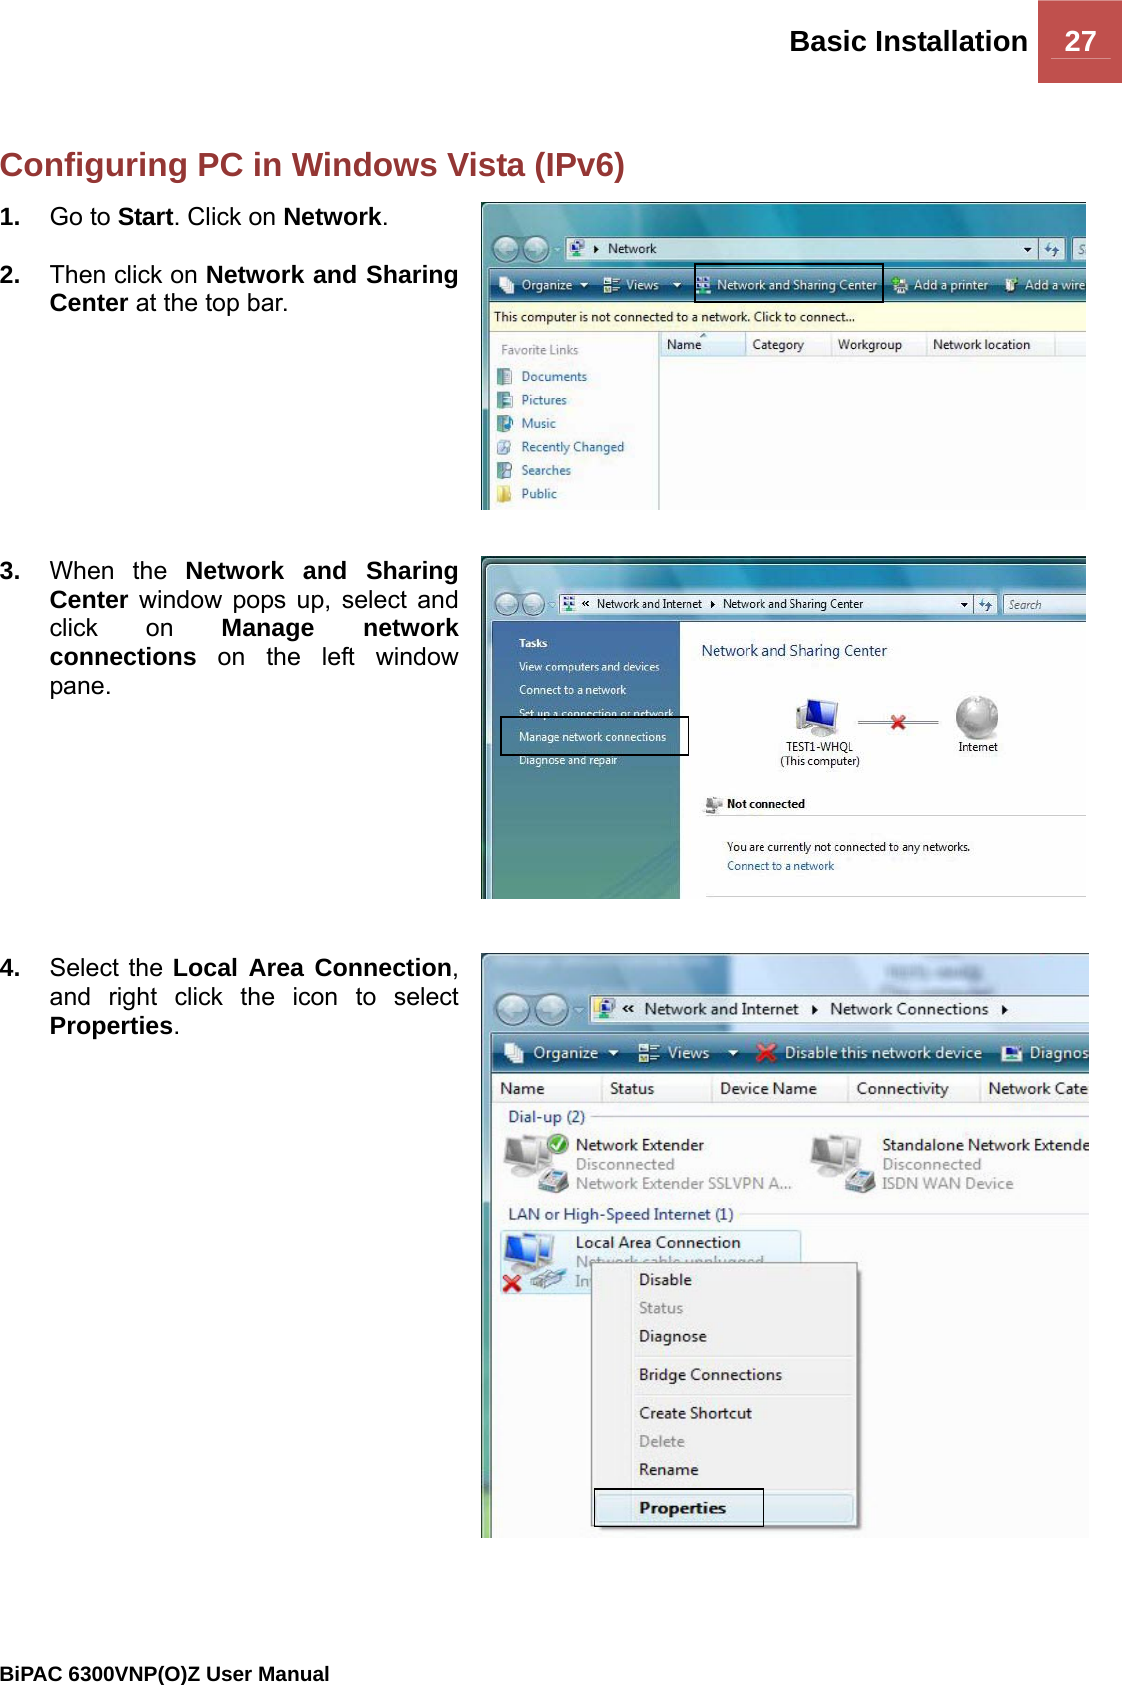 Basic Installation 27                                                BiPAC 6300VNP(O)Z User Manual   Configuring PC in Windows Vista (IPv6)  1.  Go to Start. Click on Network.  2.  Then click on Network and Sharing Center at the top bar.  3.  When the Network and Sharing Center window pops up, select and click on Manage network connections on the left window pane.  4.  Select the Local Area Connection, and right click the icon to select Properties. 